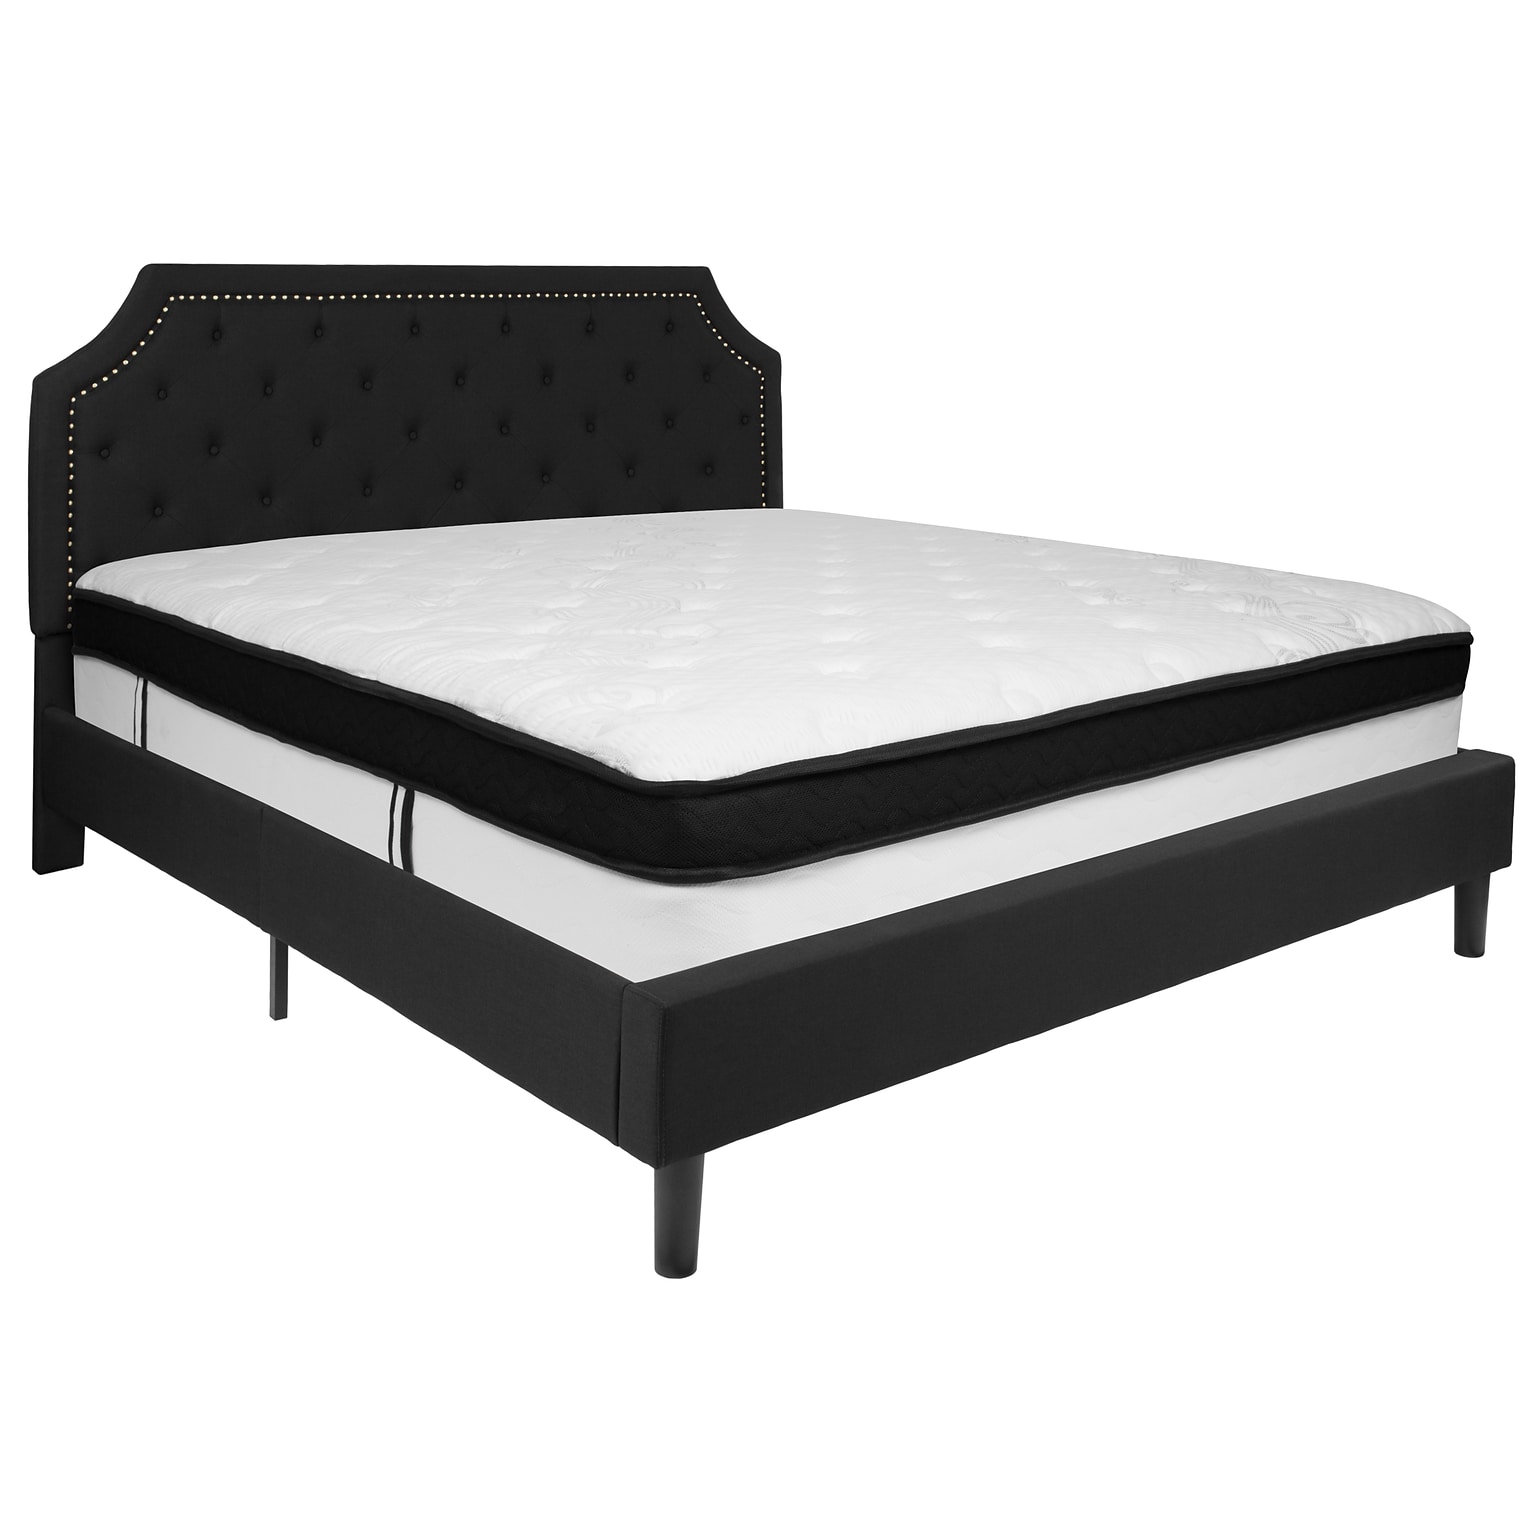 Flash Furniture Brighton Tufted Upholstered Platform Bed in Black Fabric with Memory Foam Mattress, King (SLBMF8)